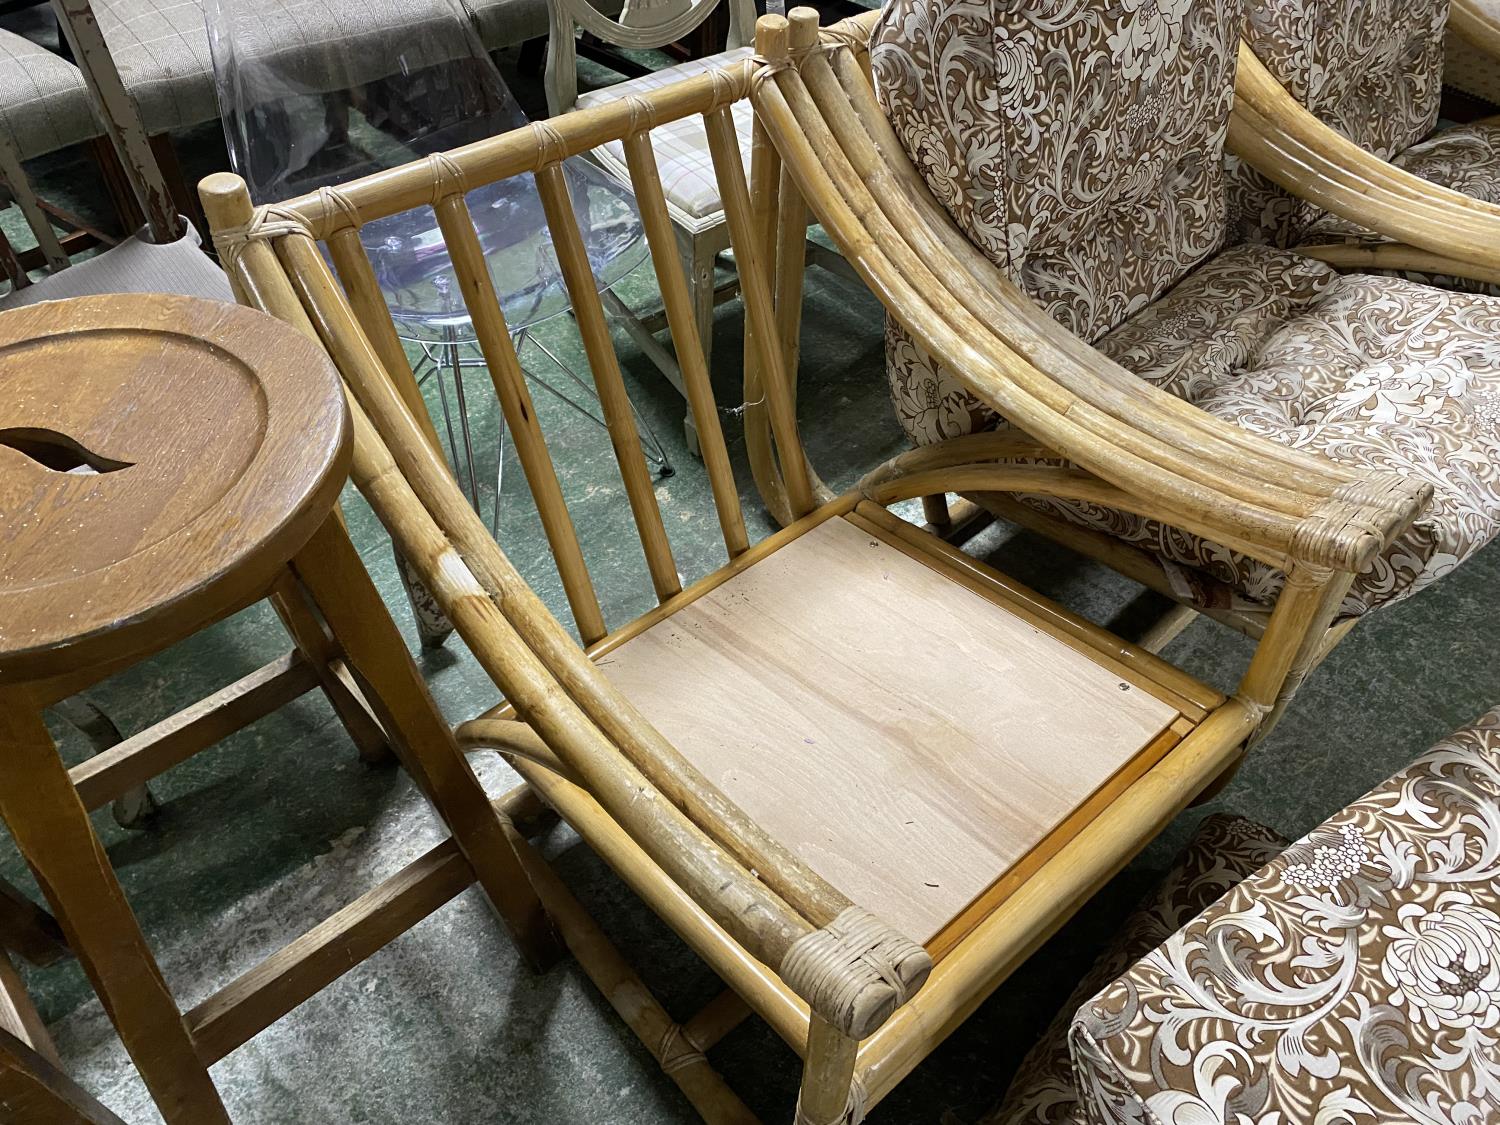 Suite of 3 pieces of bamboo/cane conservatory furniture, with William Morris design upholstery (with - Image 2 of 4